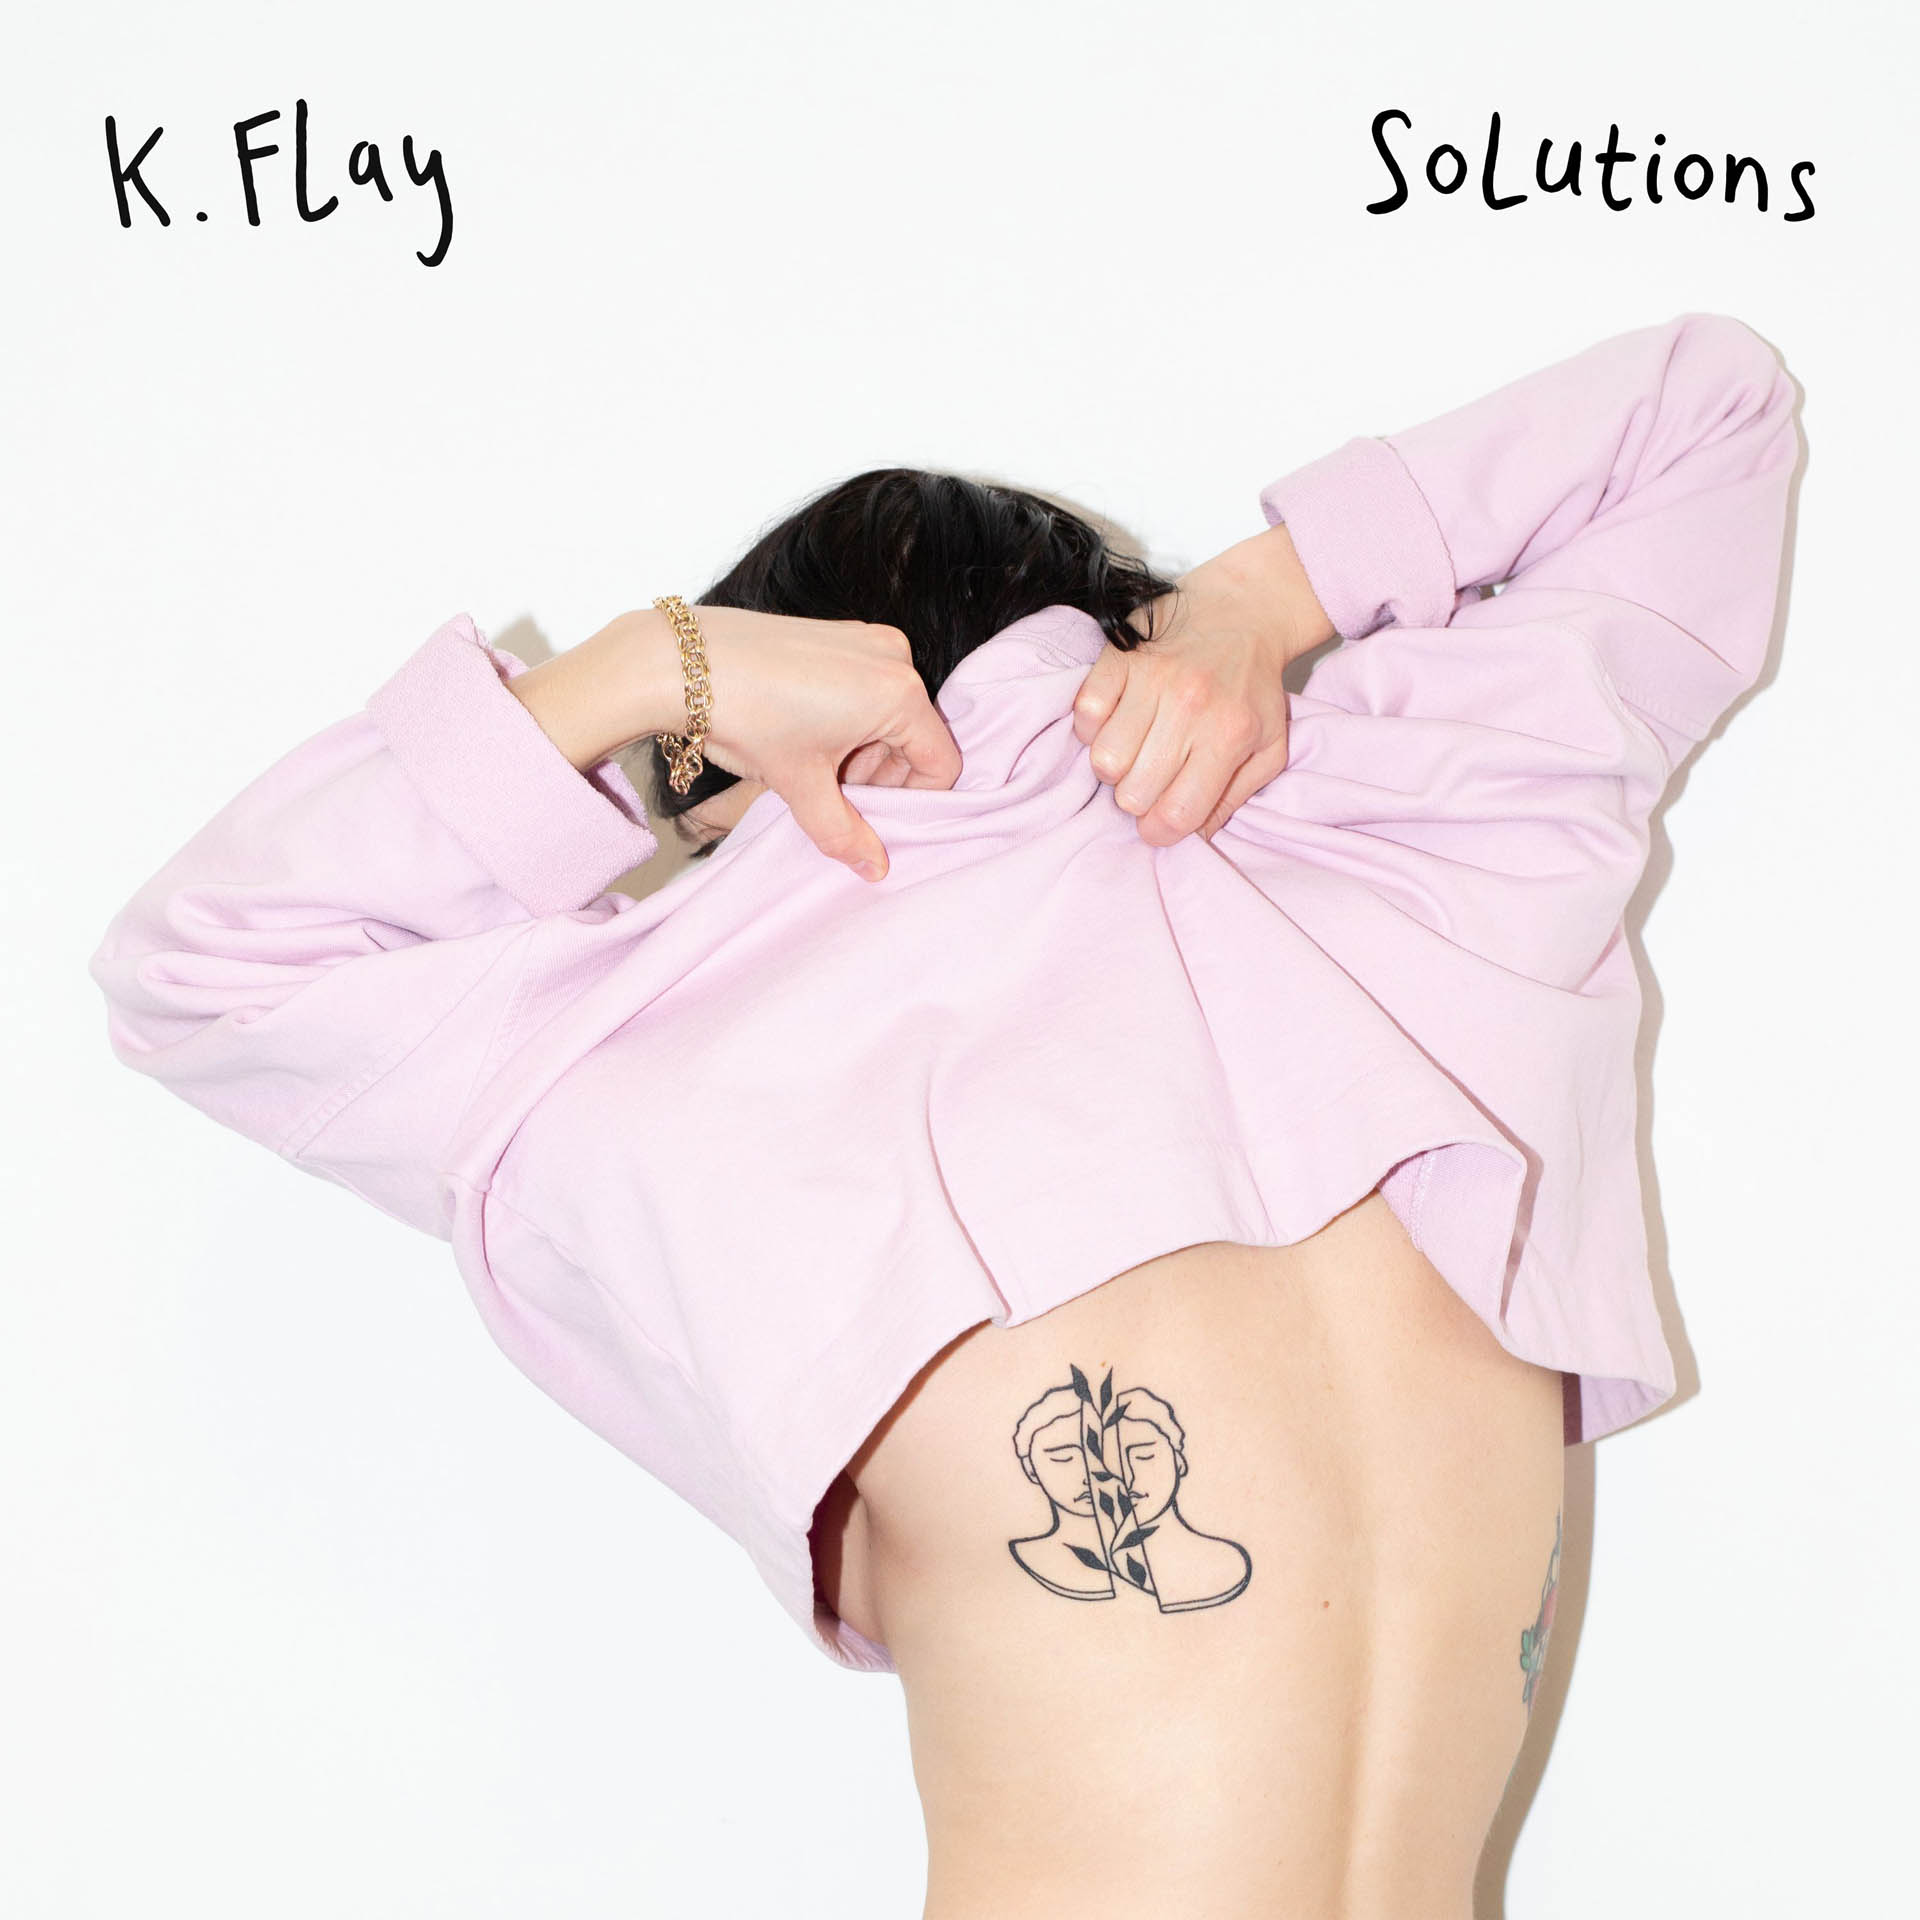 K. Flay - Solutions